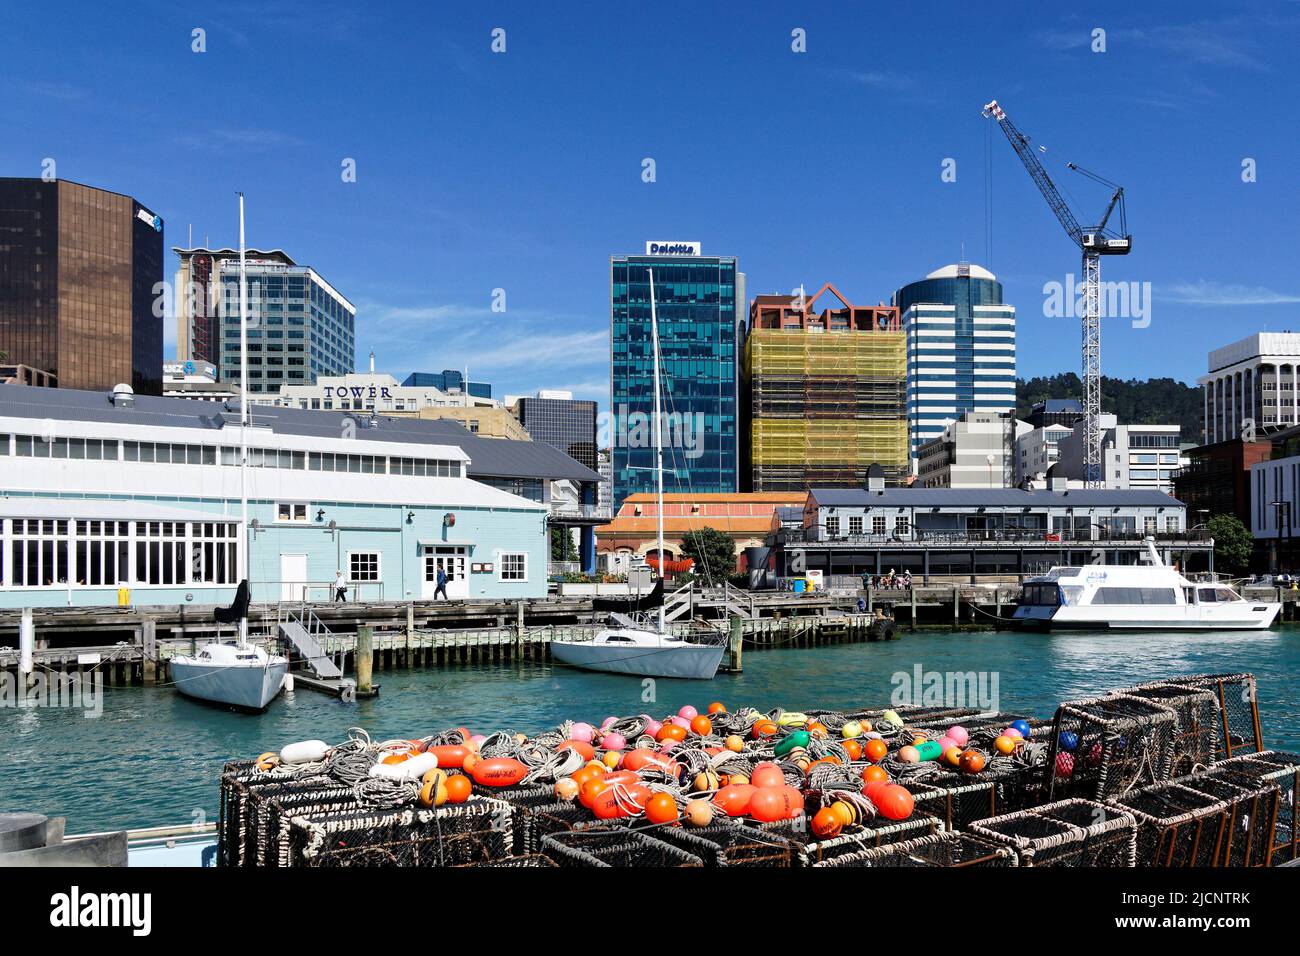 Wellington, Aotearoa / New Zealand - December 5, 2015: The central business district viewed from the waterfront. Stock Photo